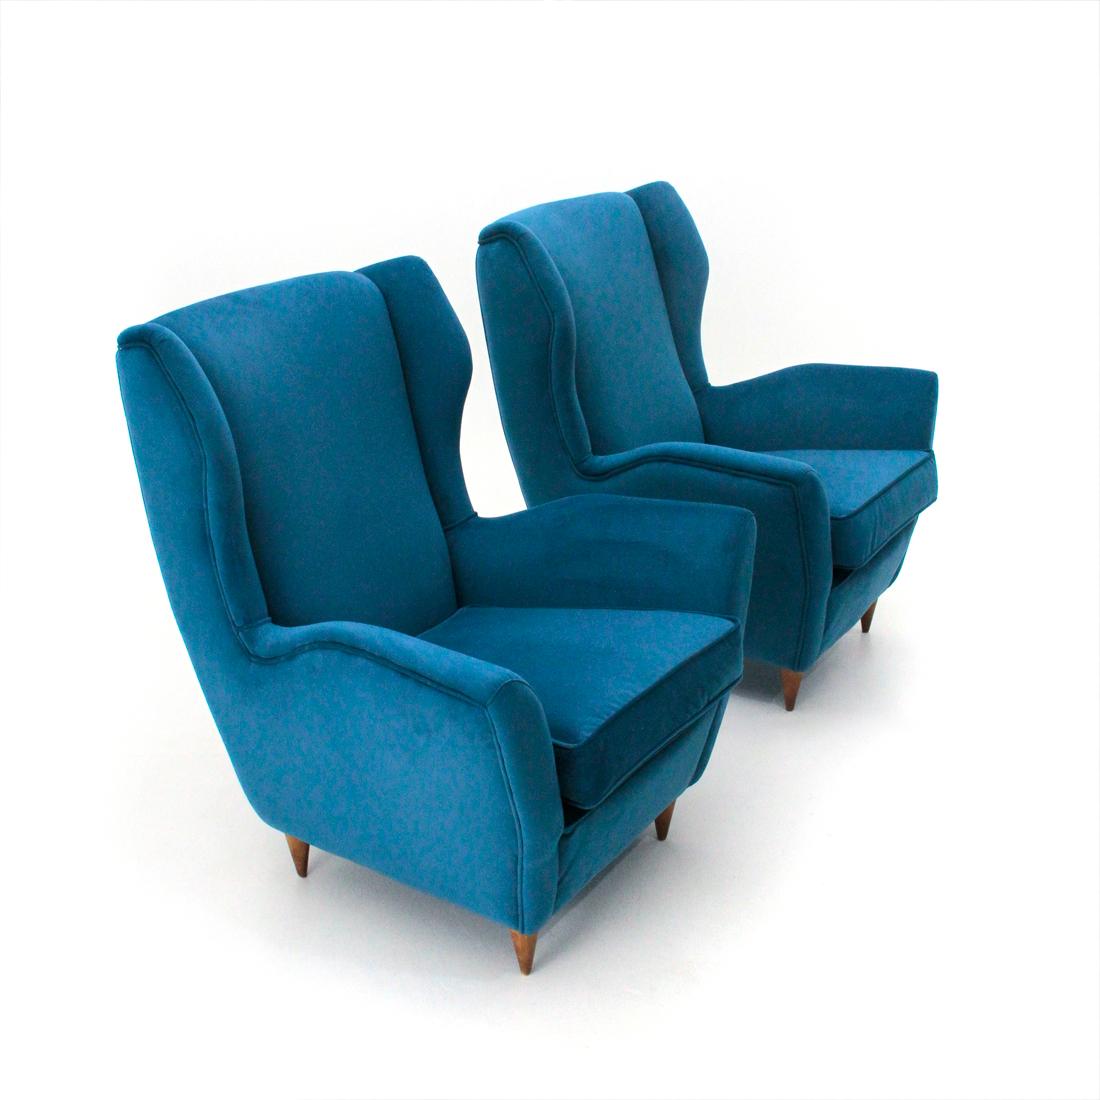 Pair of Italian-made armchairs produced in the 1950s.
Wooden structure padded and lined with new blue velvet fabric.
Legs in turned conical wood.
Good general conditions, some signs due to normal use over time.

Dimensions: Length 80 cm, depth